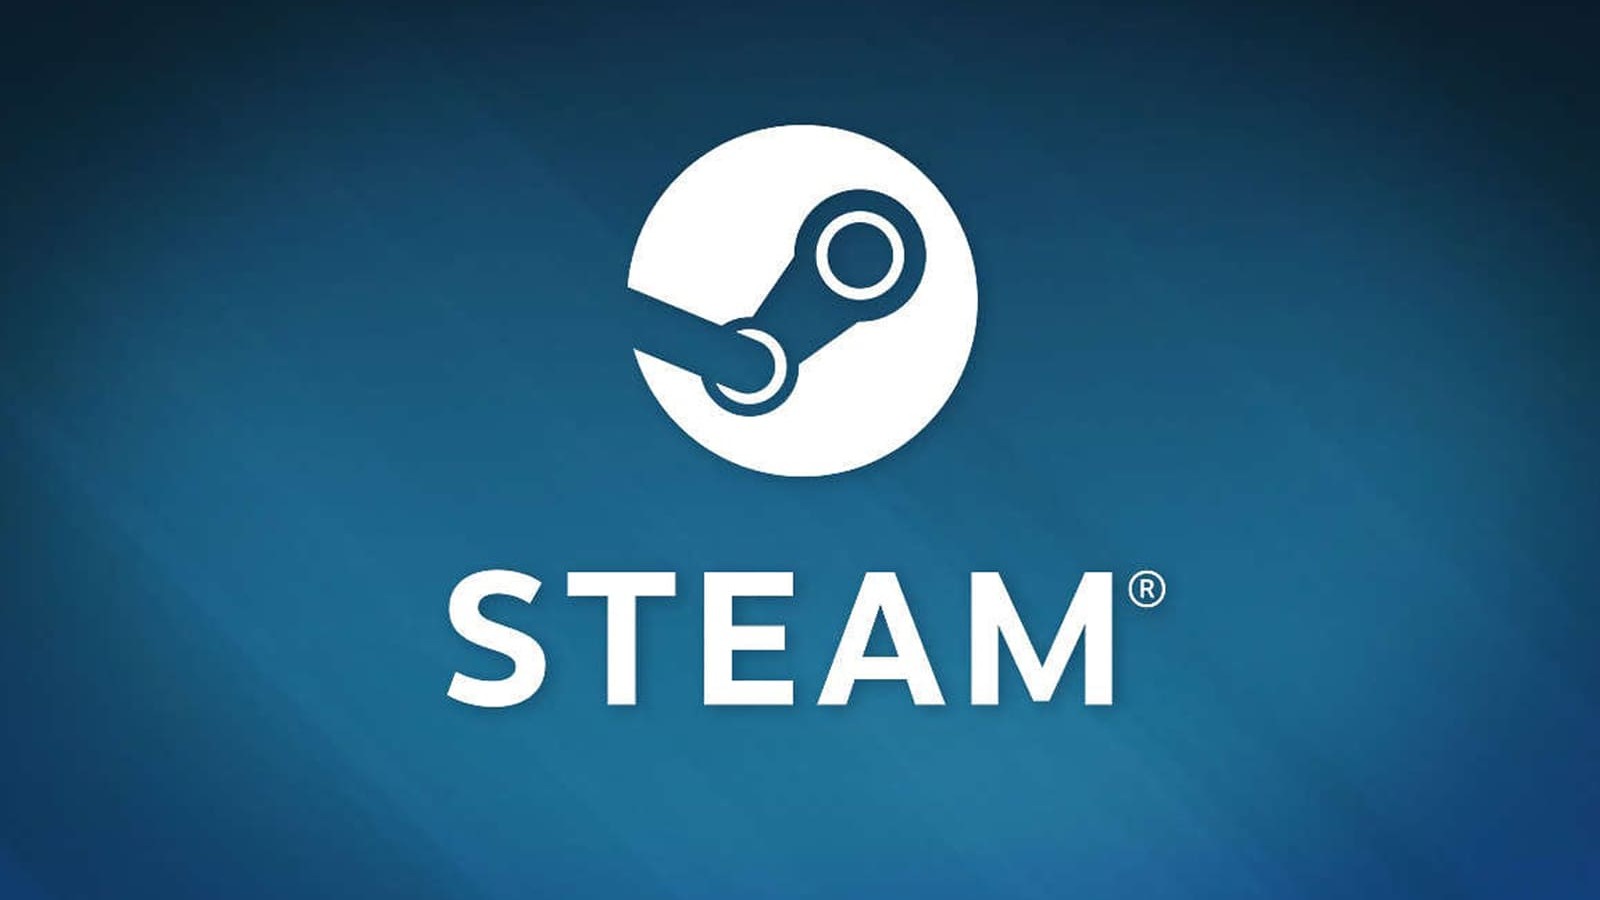 Rumor: Steam will allow users to hide specific game activity as ‘private’